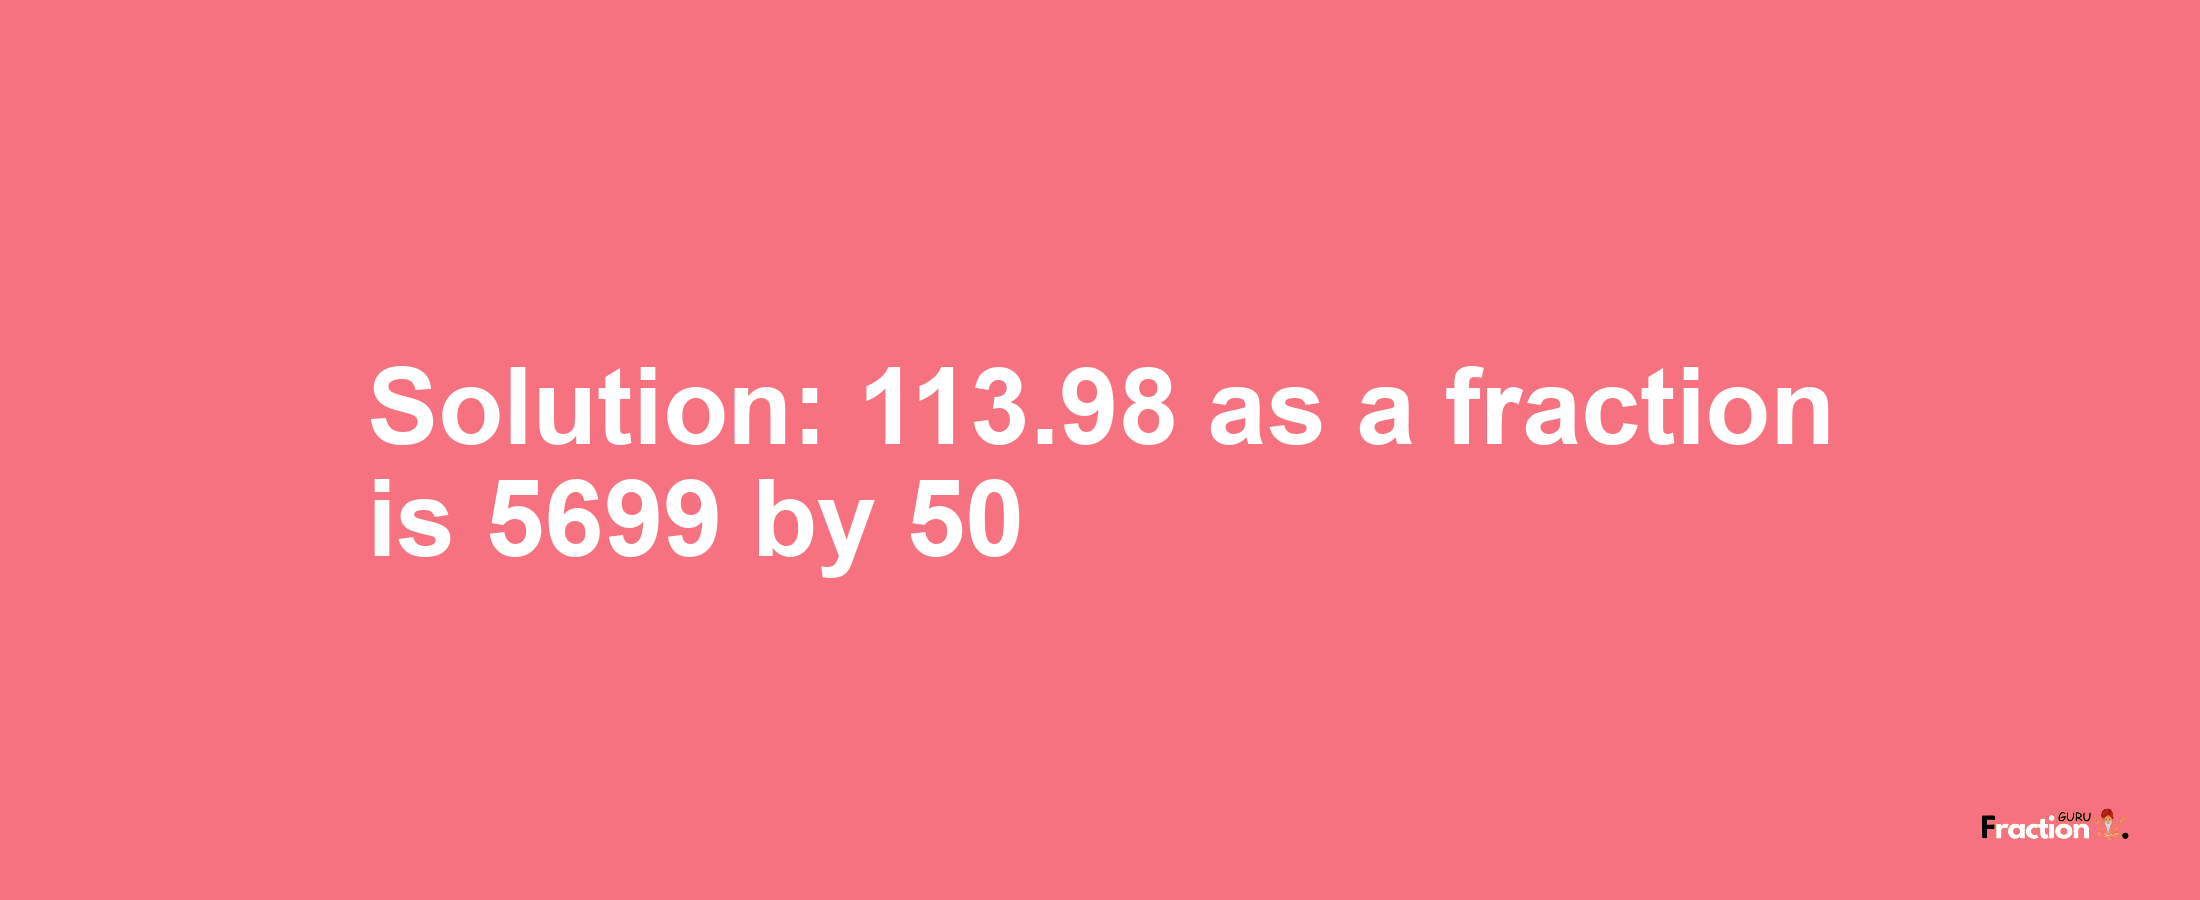 Solution:113.98 as a fraction is 5699/50